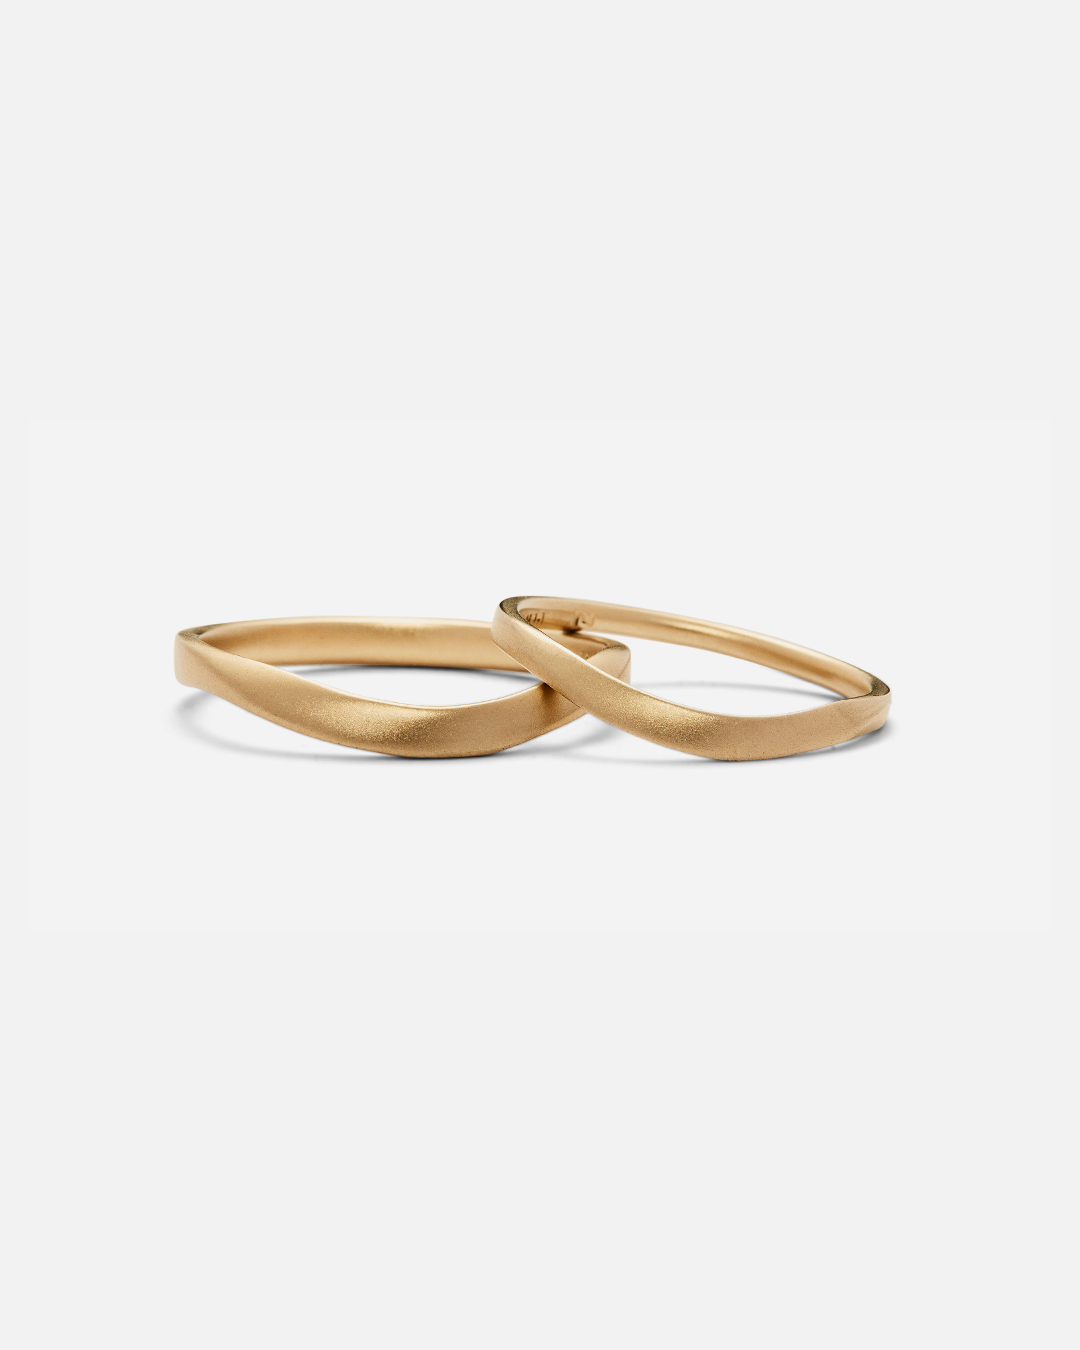 U Band / Small By Hiroyo in Wedding Bands Category